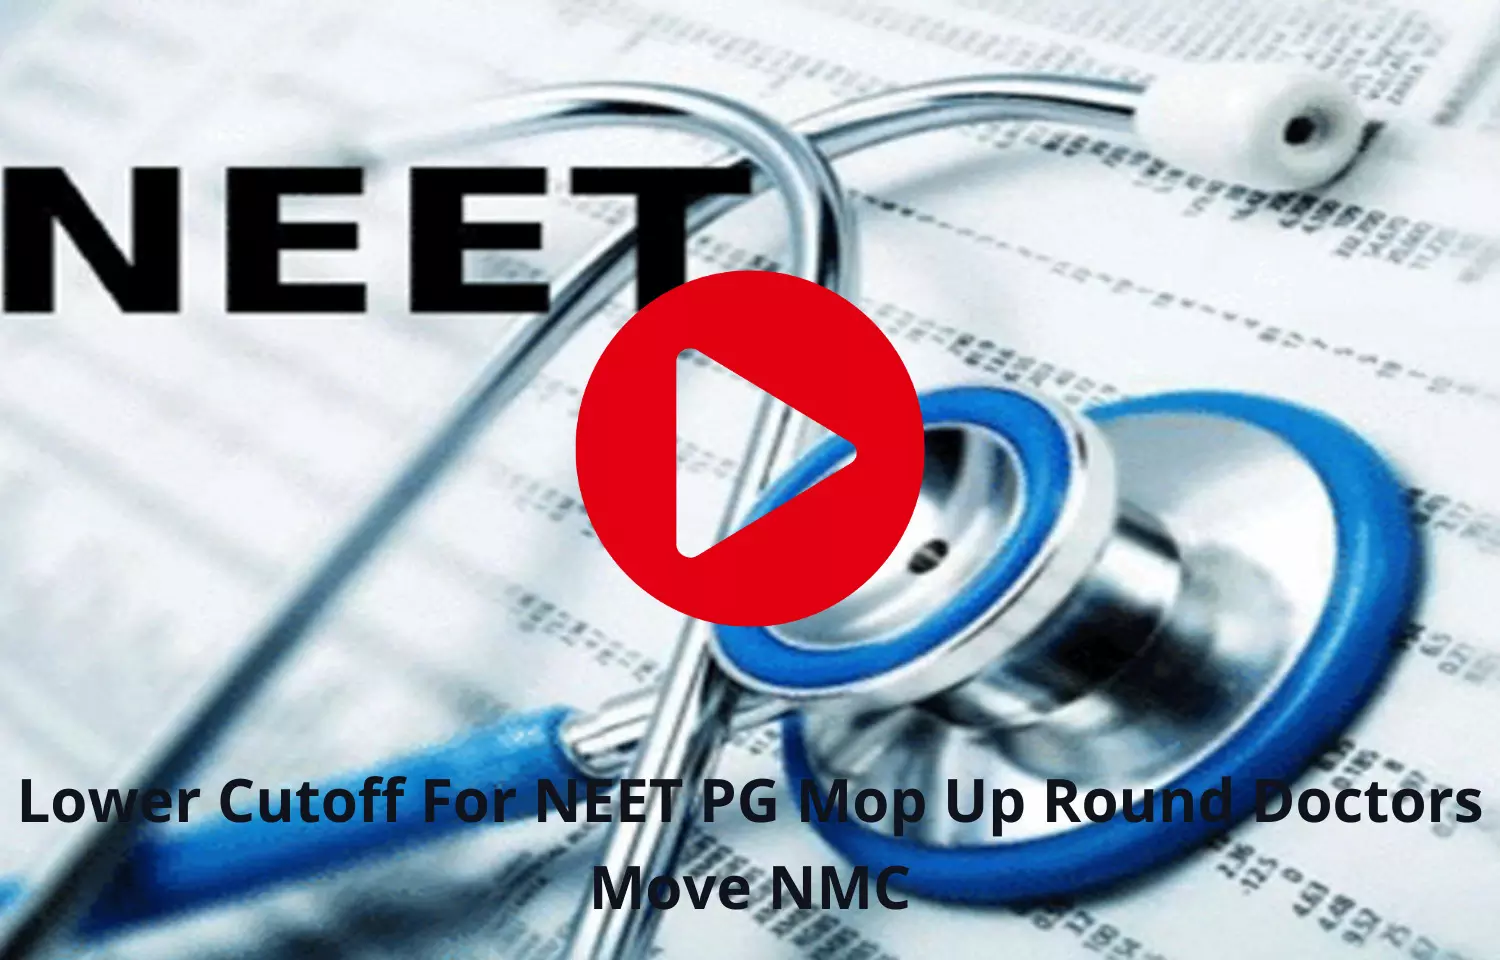 Lower Cutoff For NEET PG Round Doctors Move NMC